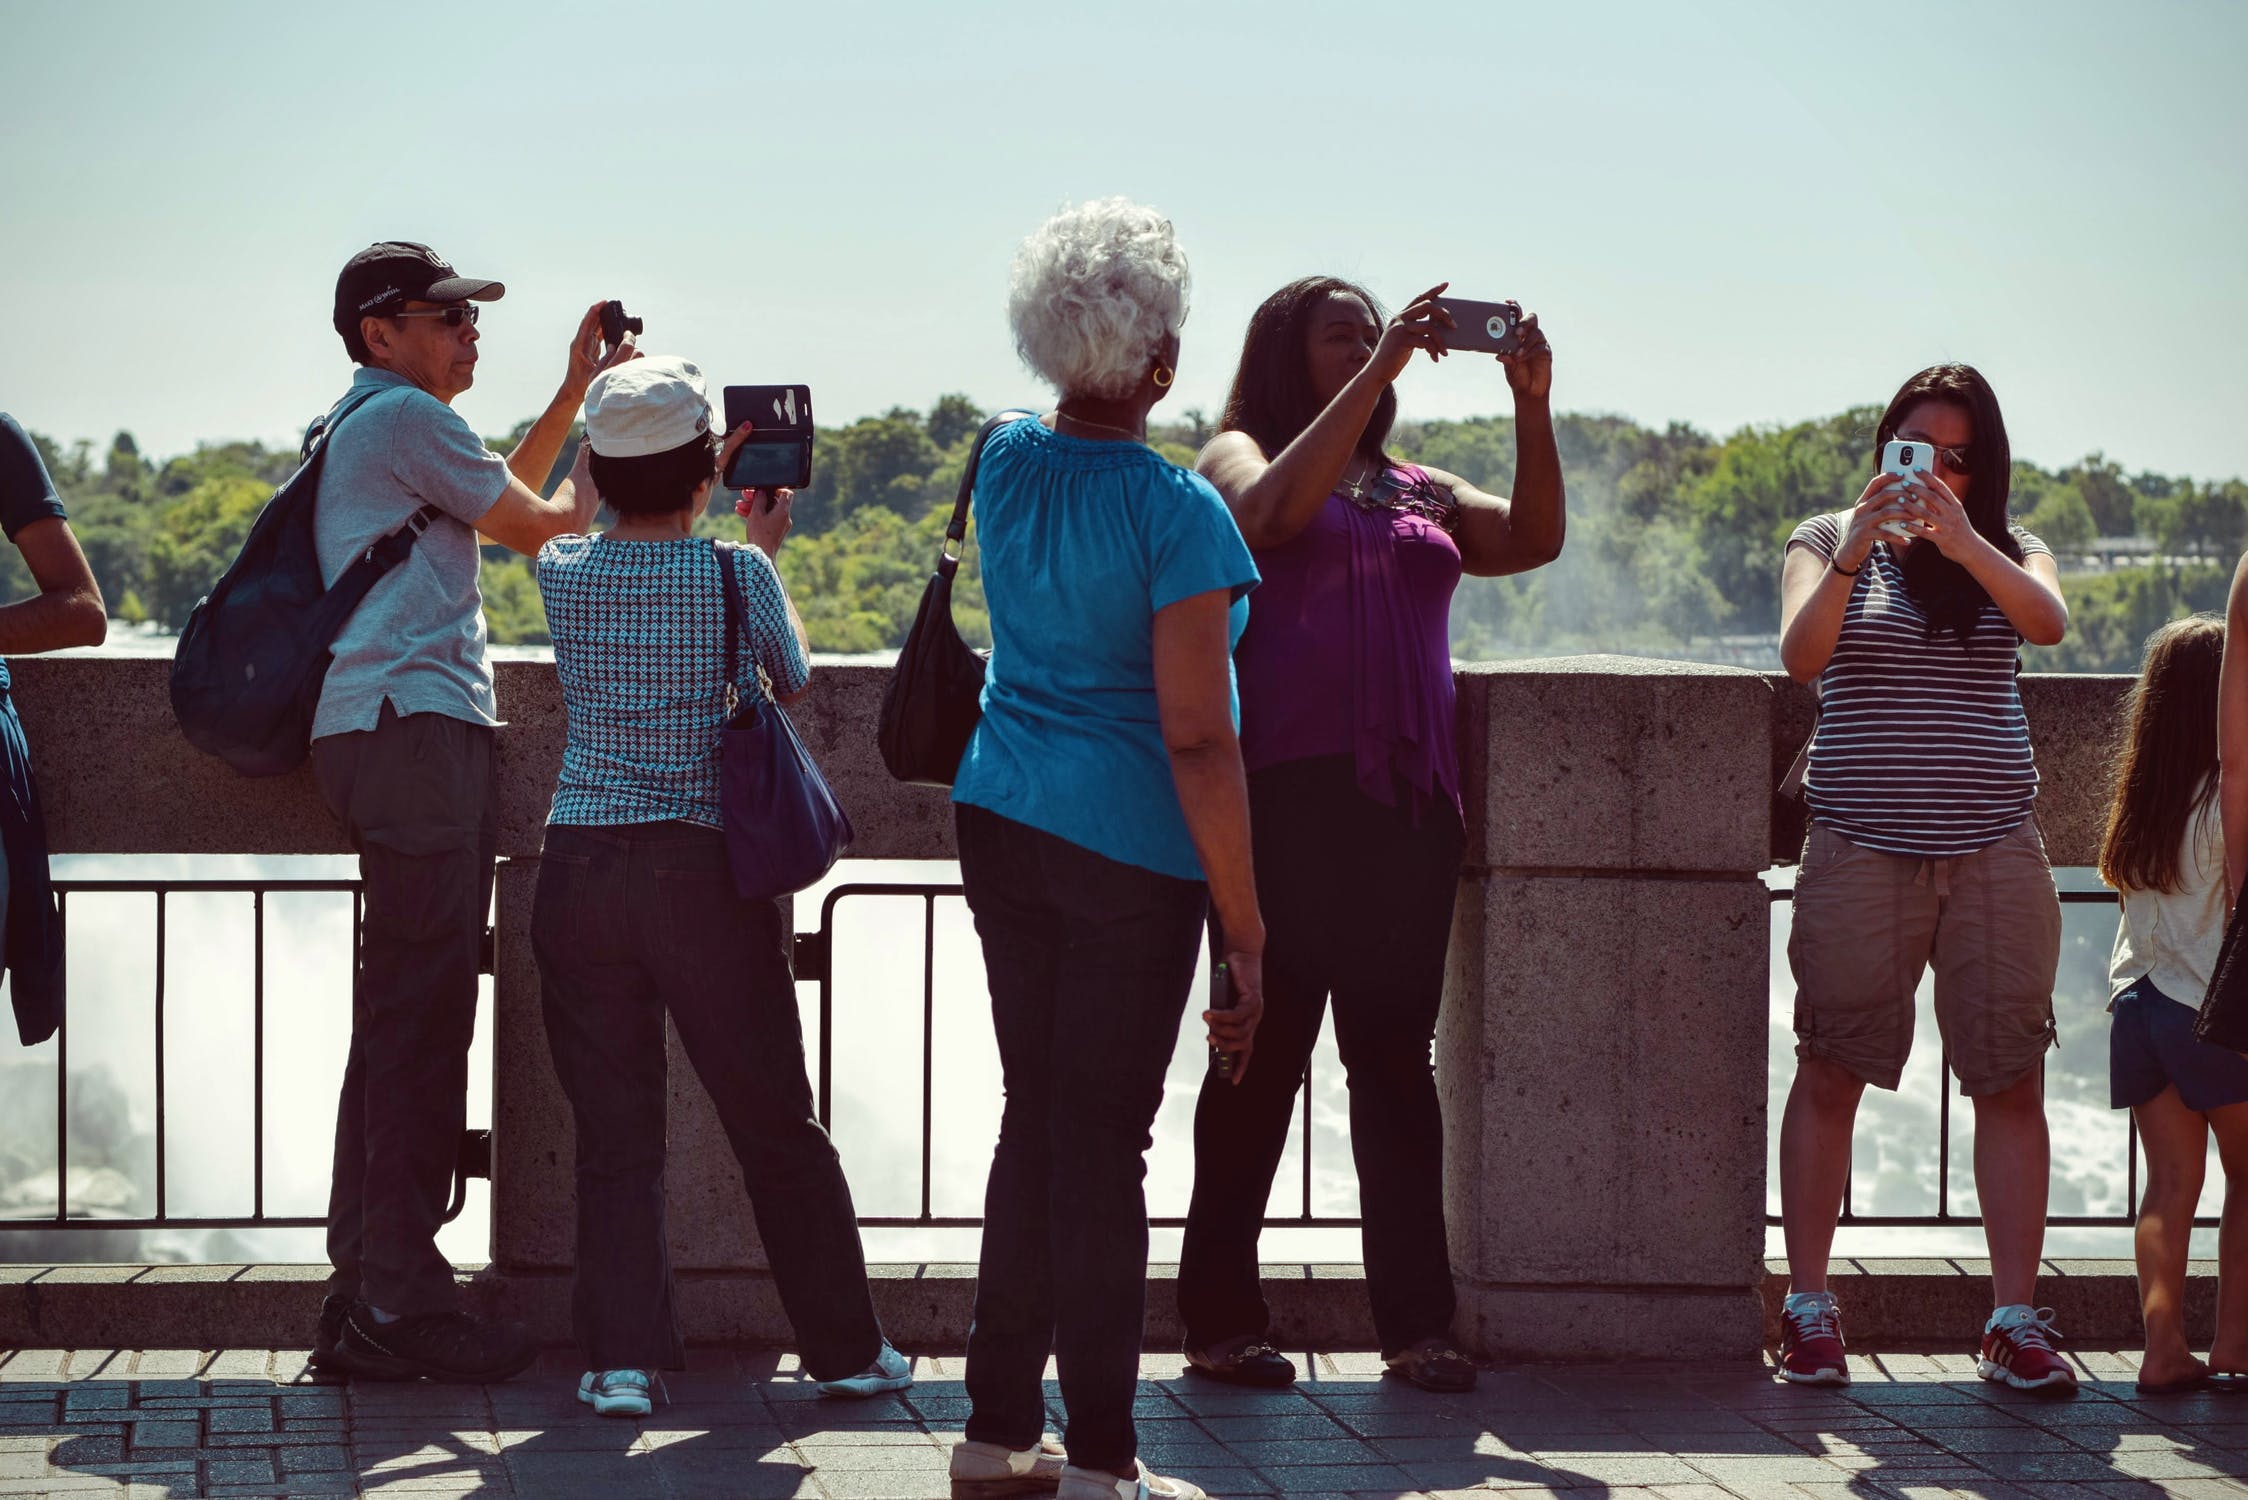 Group of tourists taking pictures